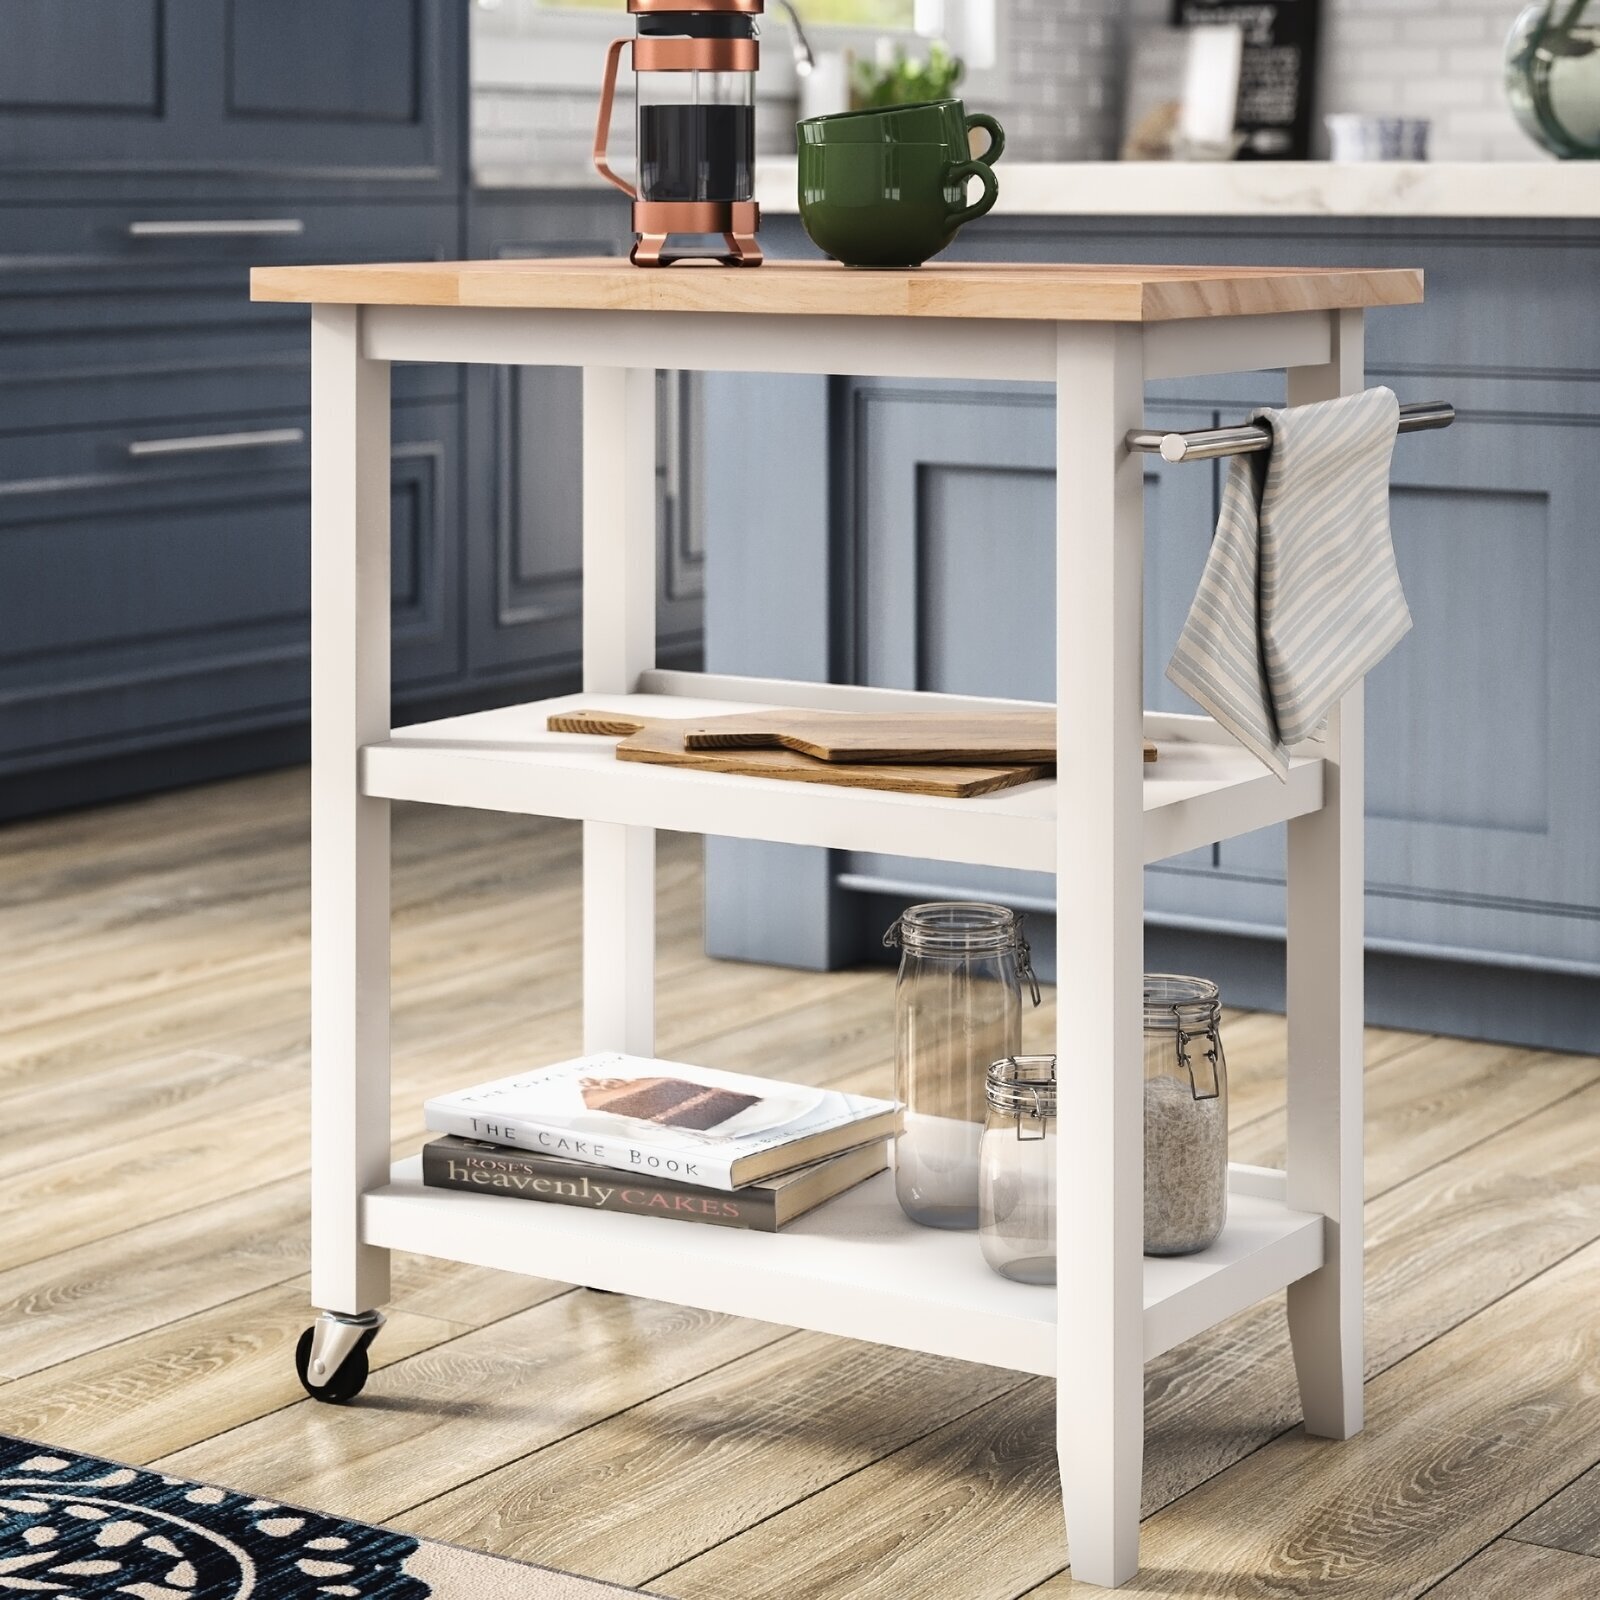 Kitchen Island Cart with Shelves